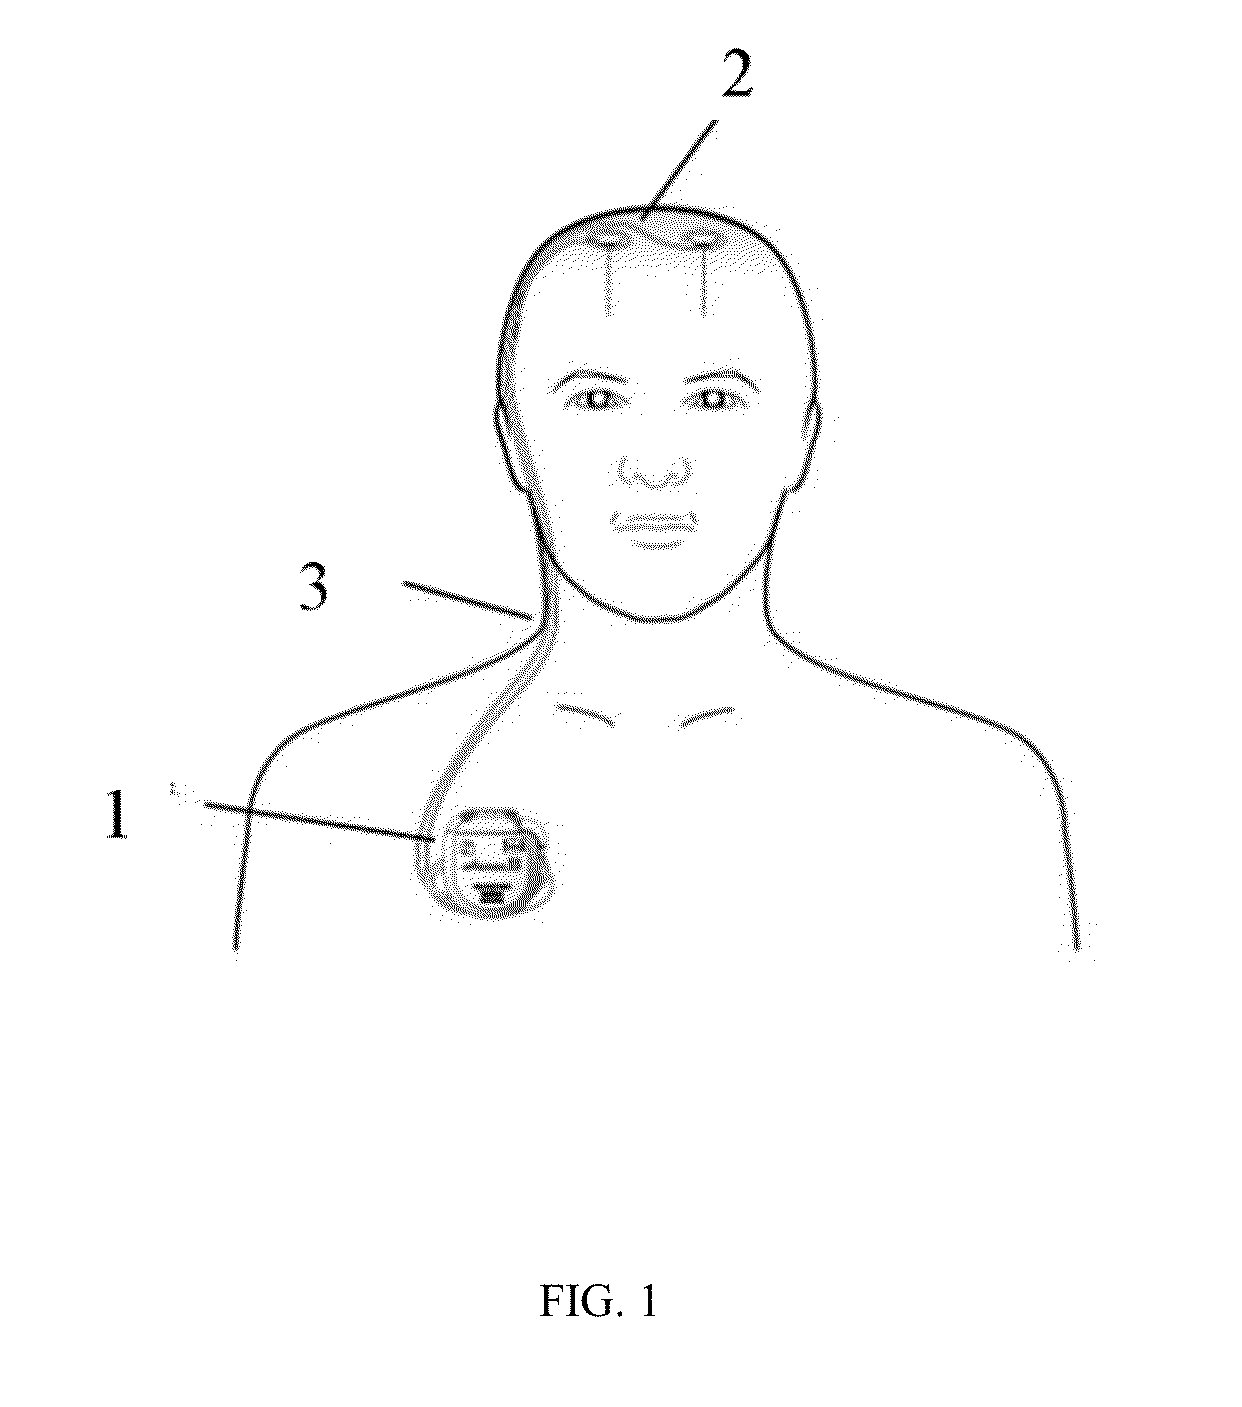 Lead, device and method for electrical stimulation of deep brain